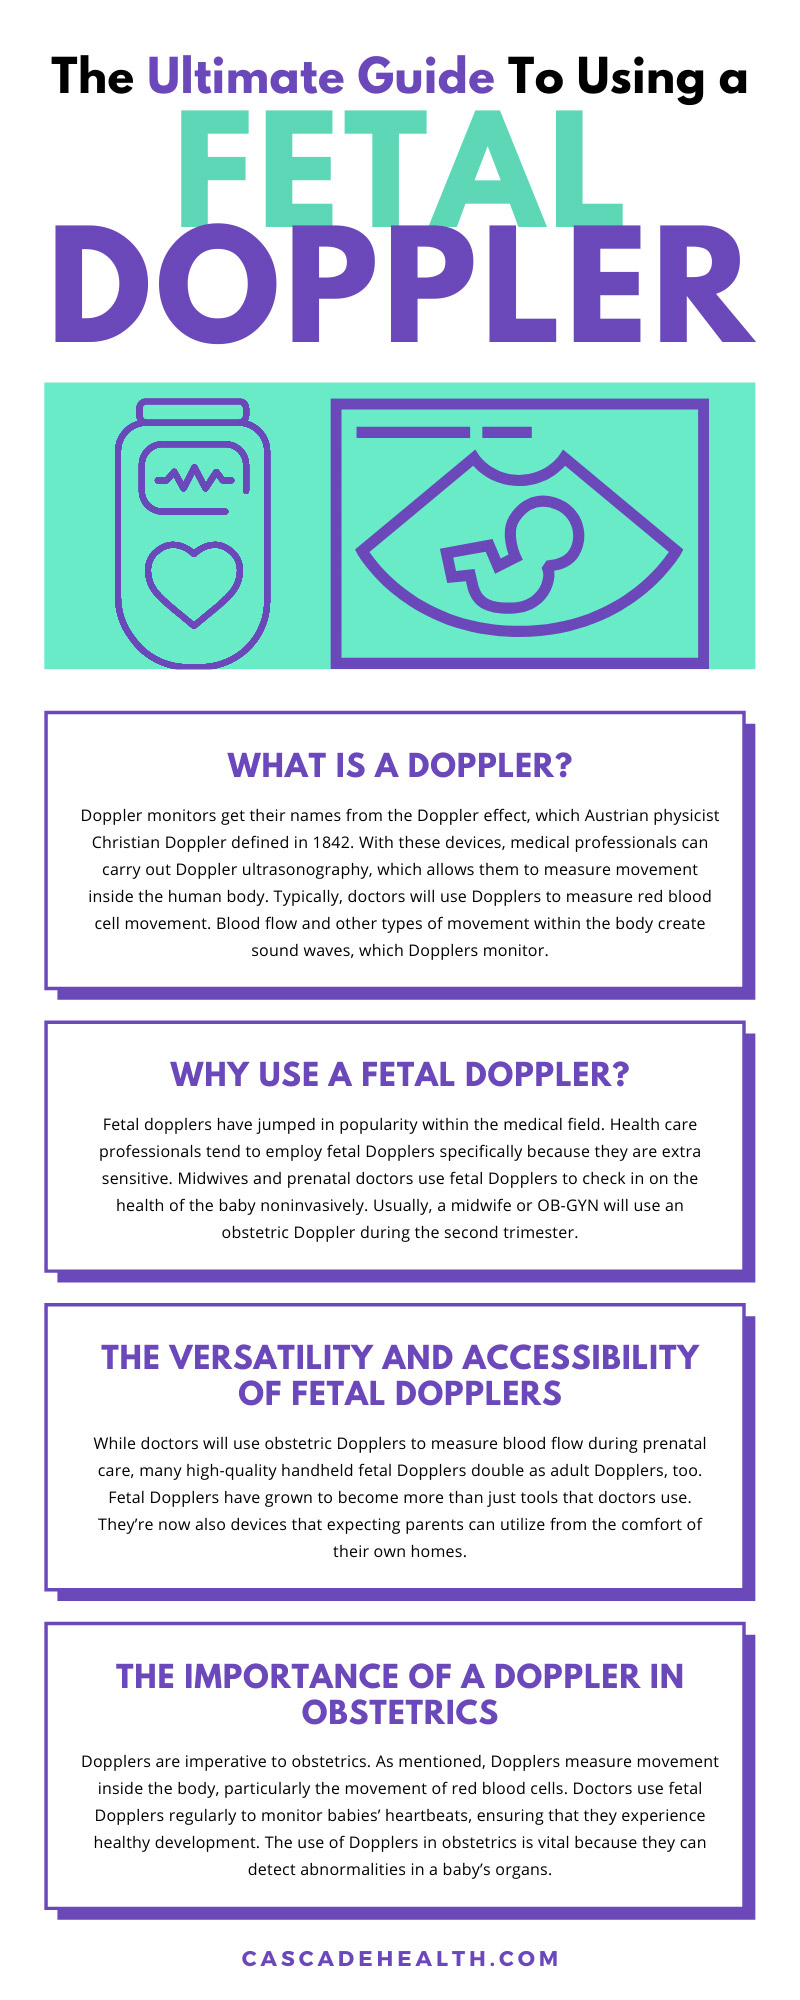 Is my Baby Growing Properly? - Baby Doppler Blog